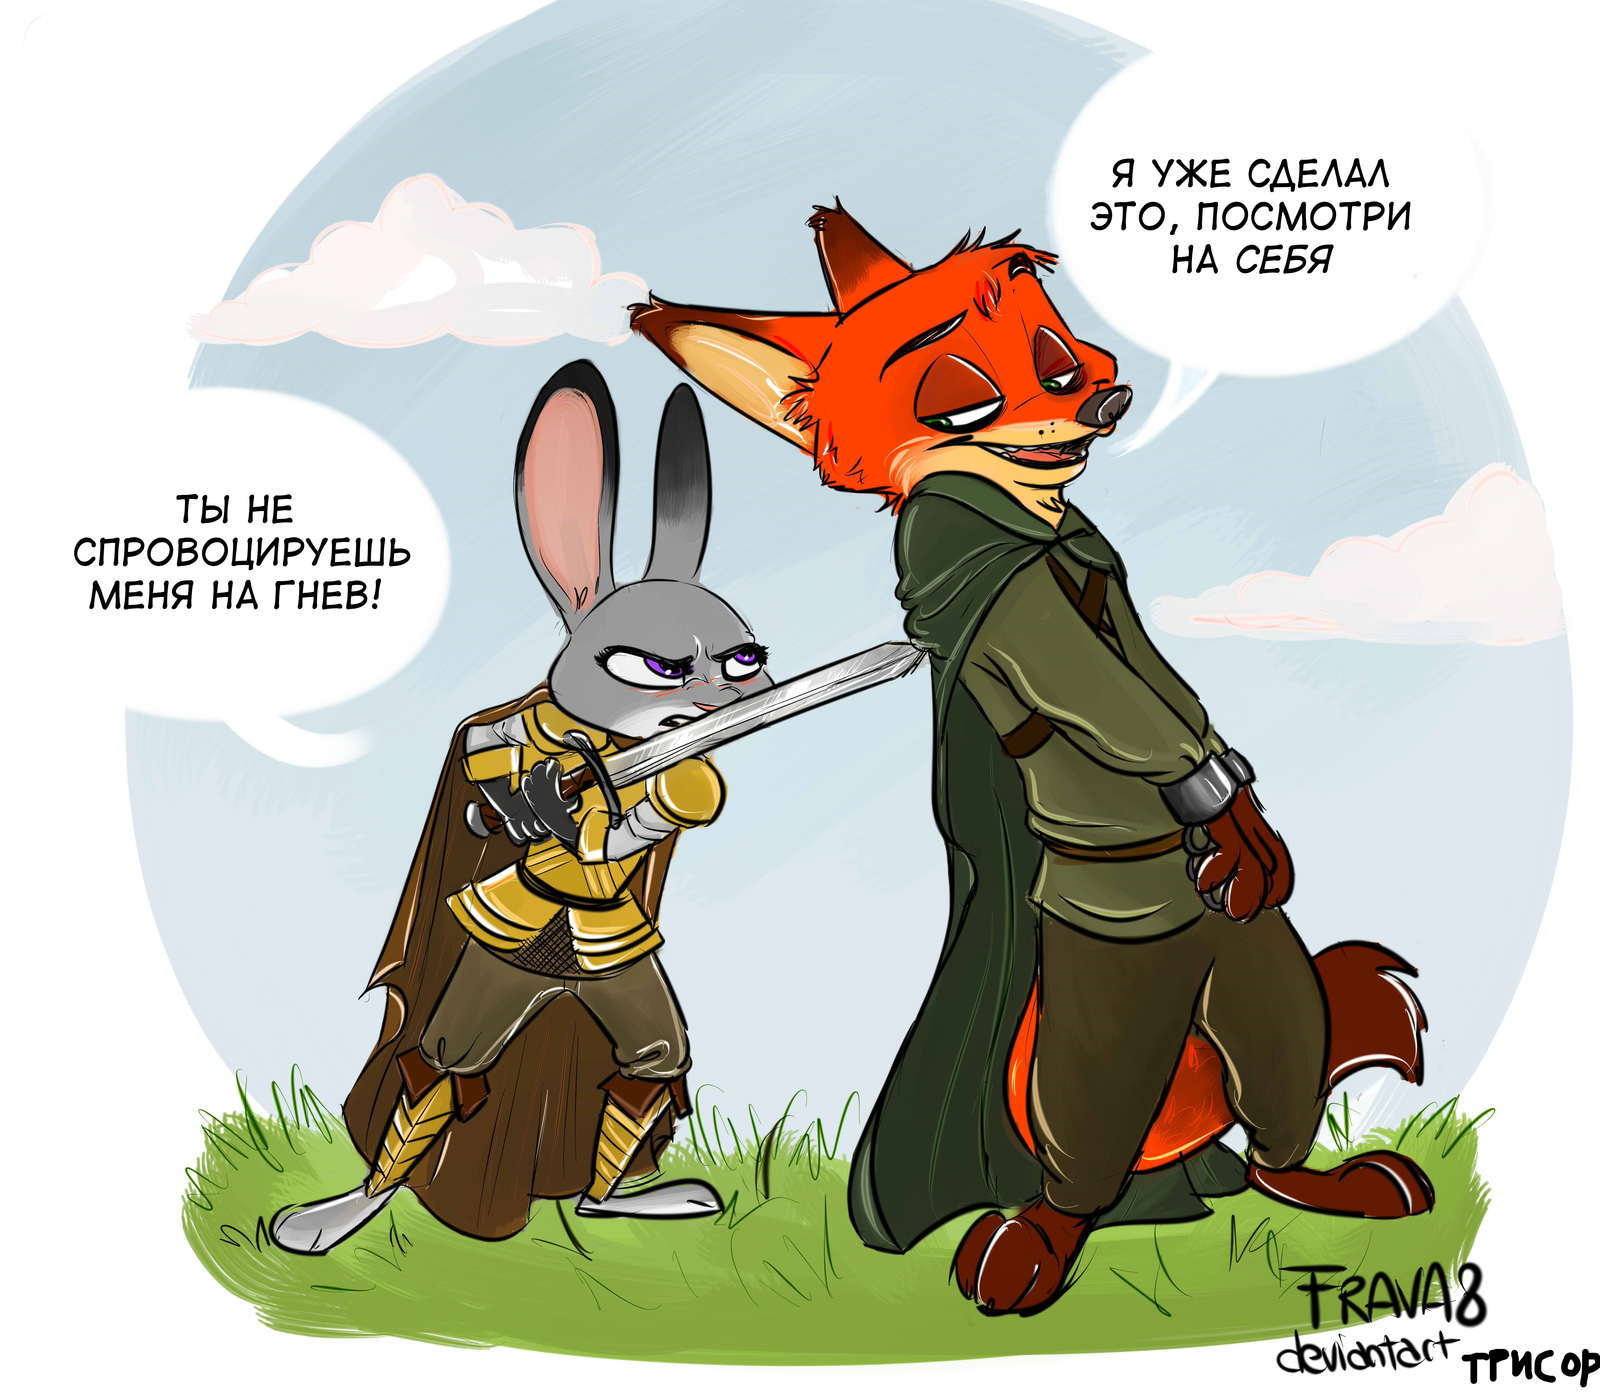 You are not allowed to speak, Kingslayer! - Crossover, Game of Thrones, Judy hopps, Nick wilde, Zootopia, Zootopia